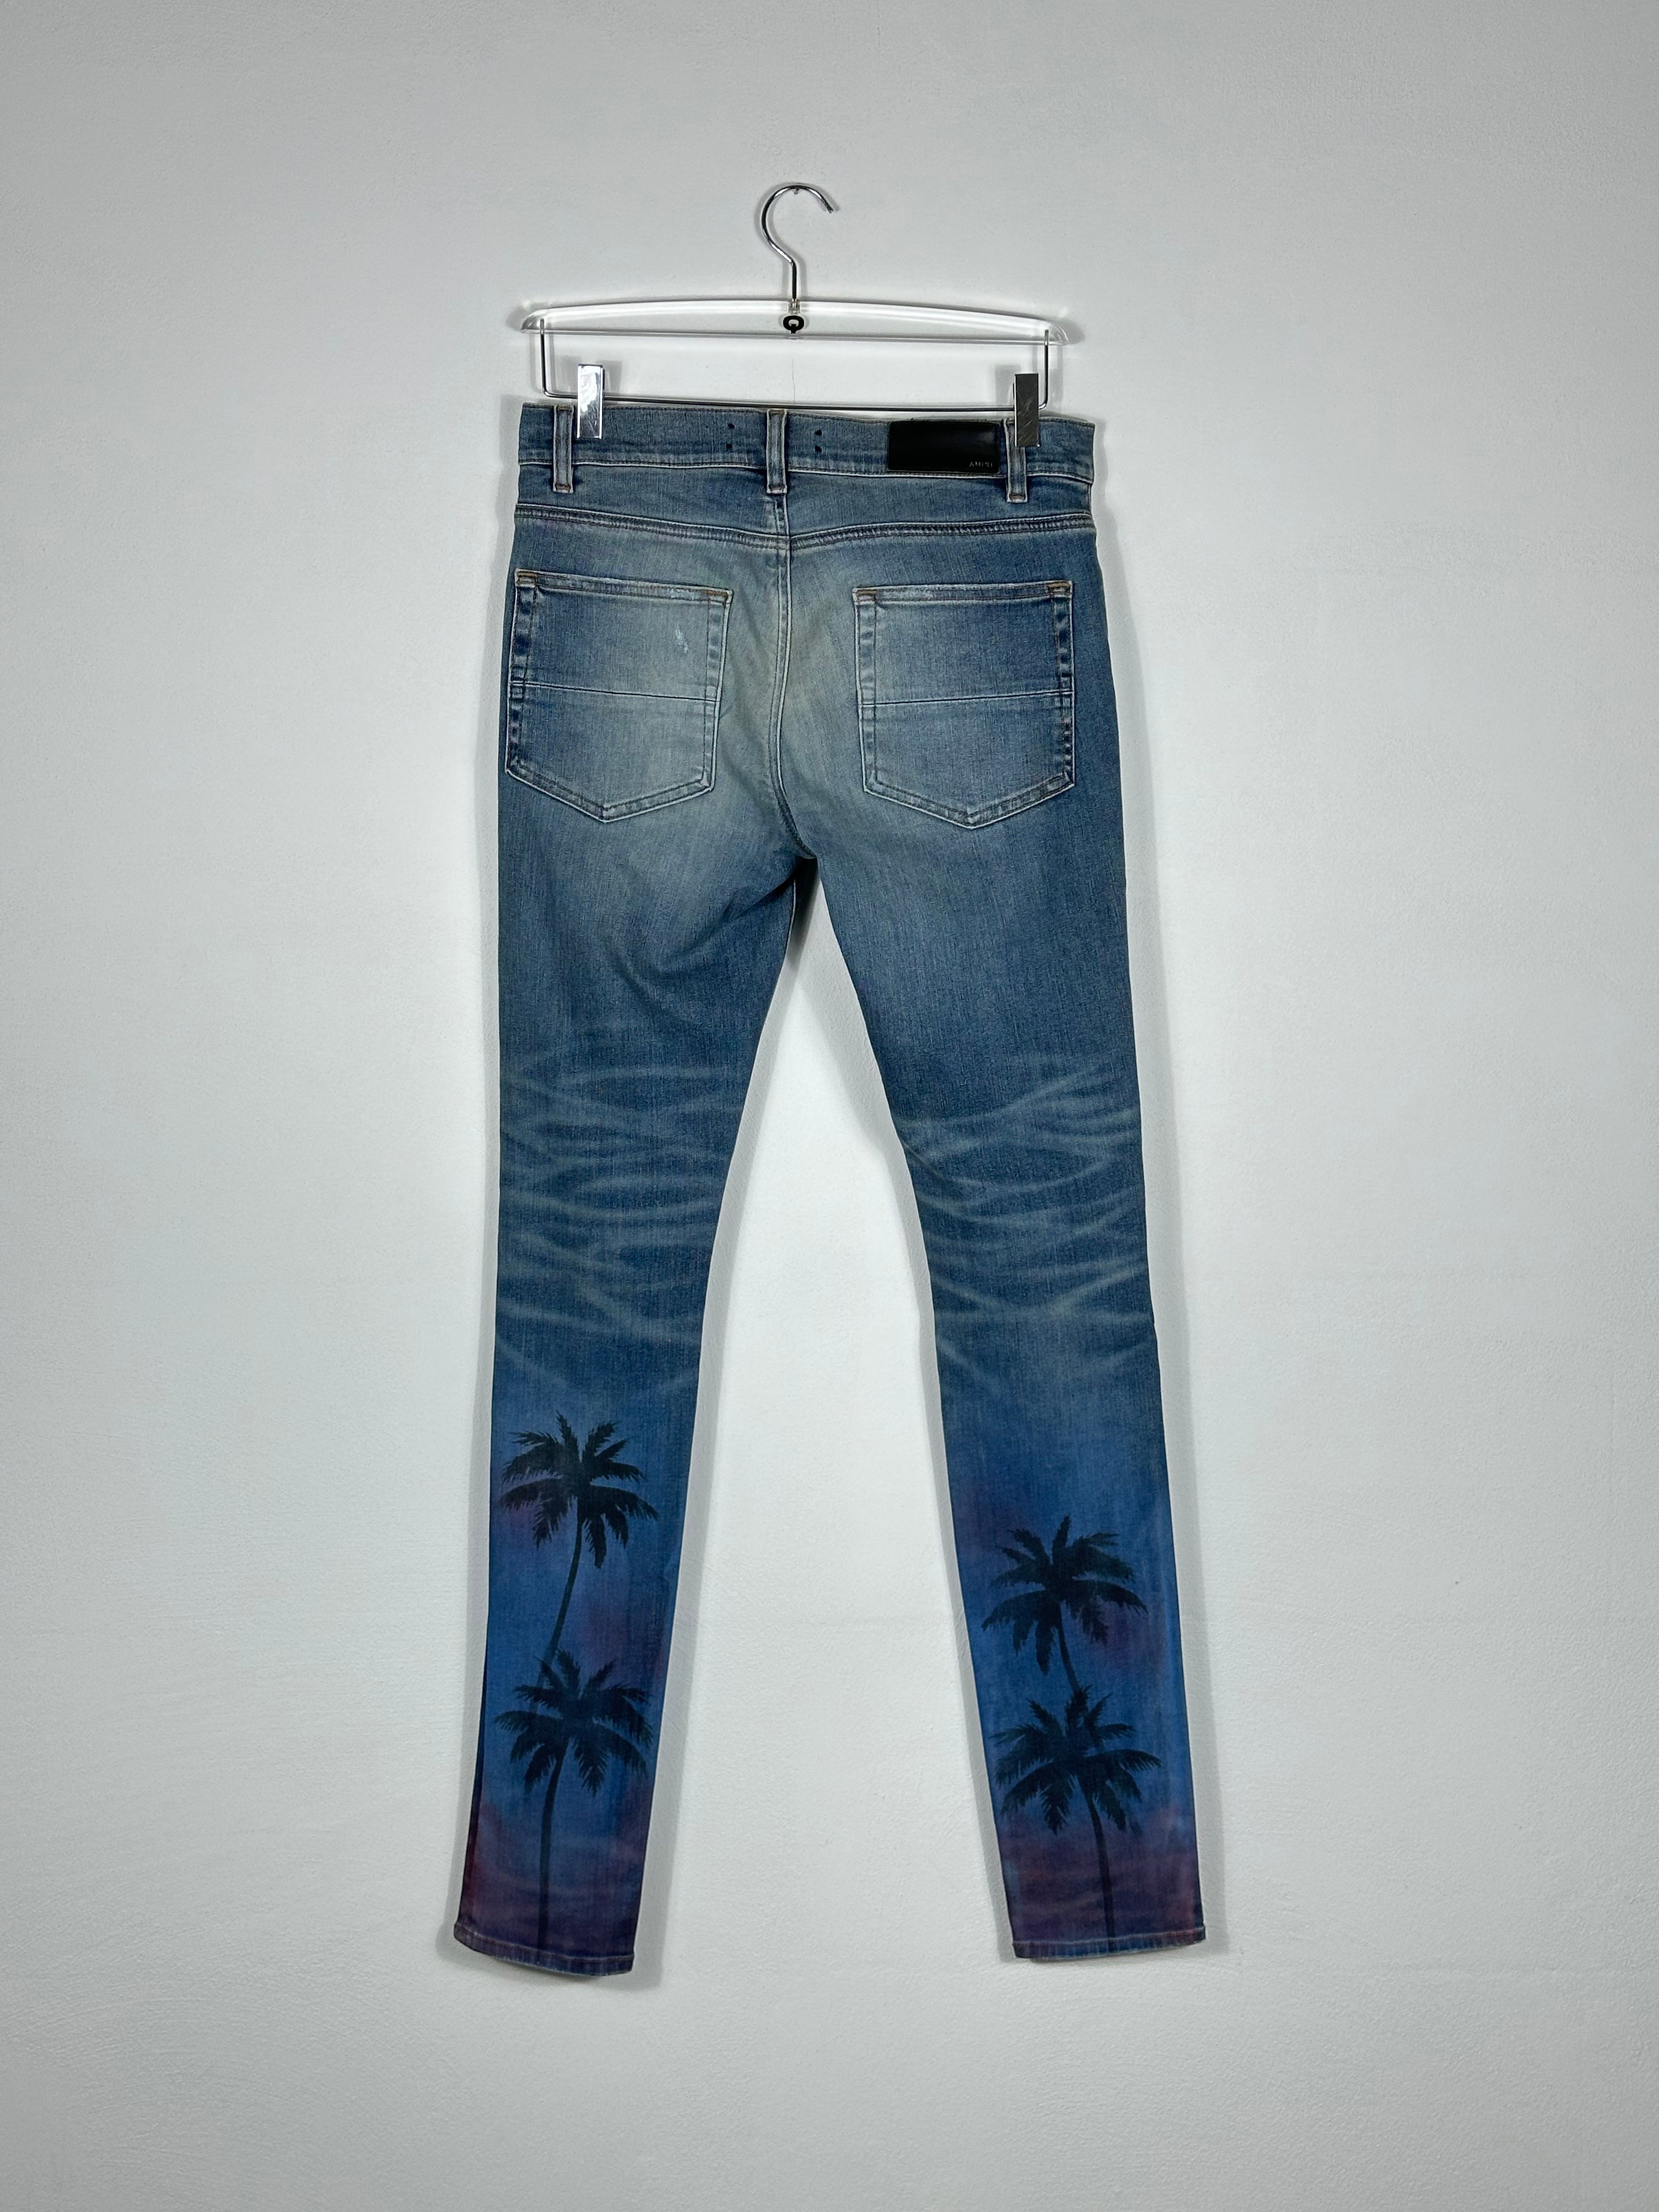 Ripped Jeans With Palms by Sfera Ebbasta